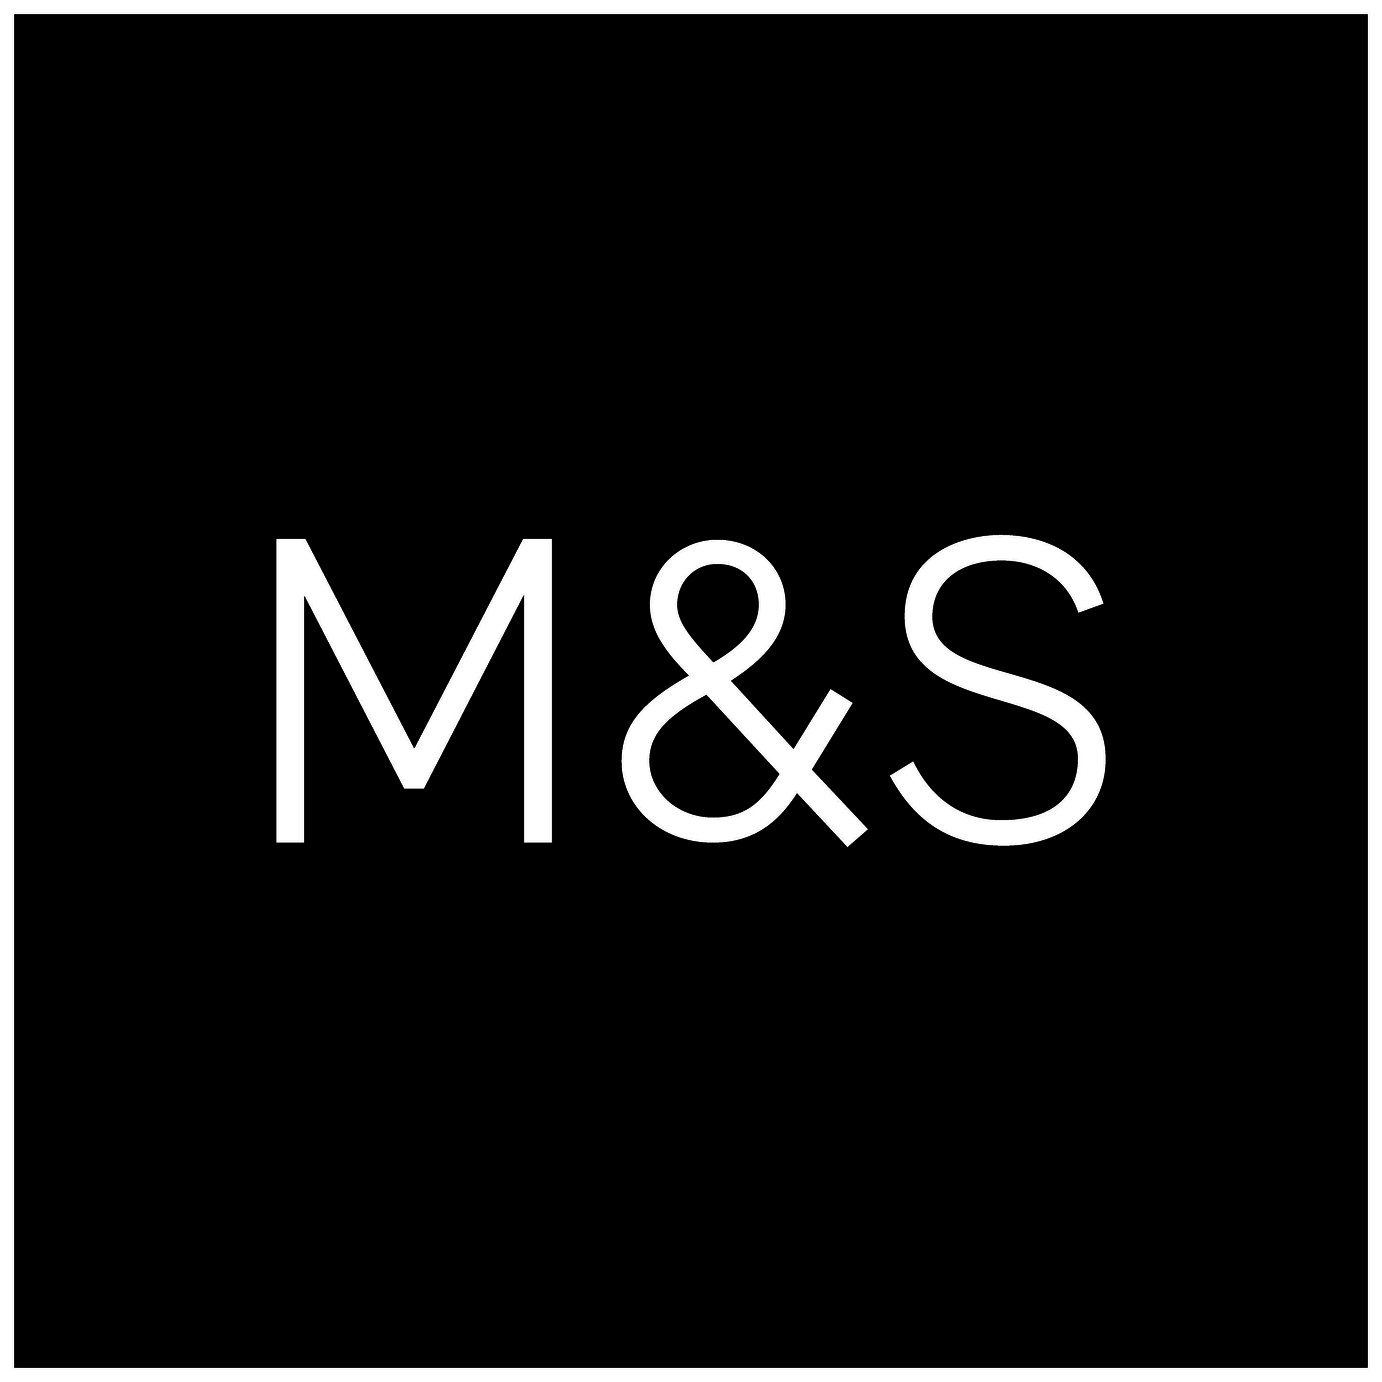 M&S 25 GBP Gift Card